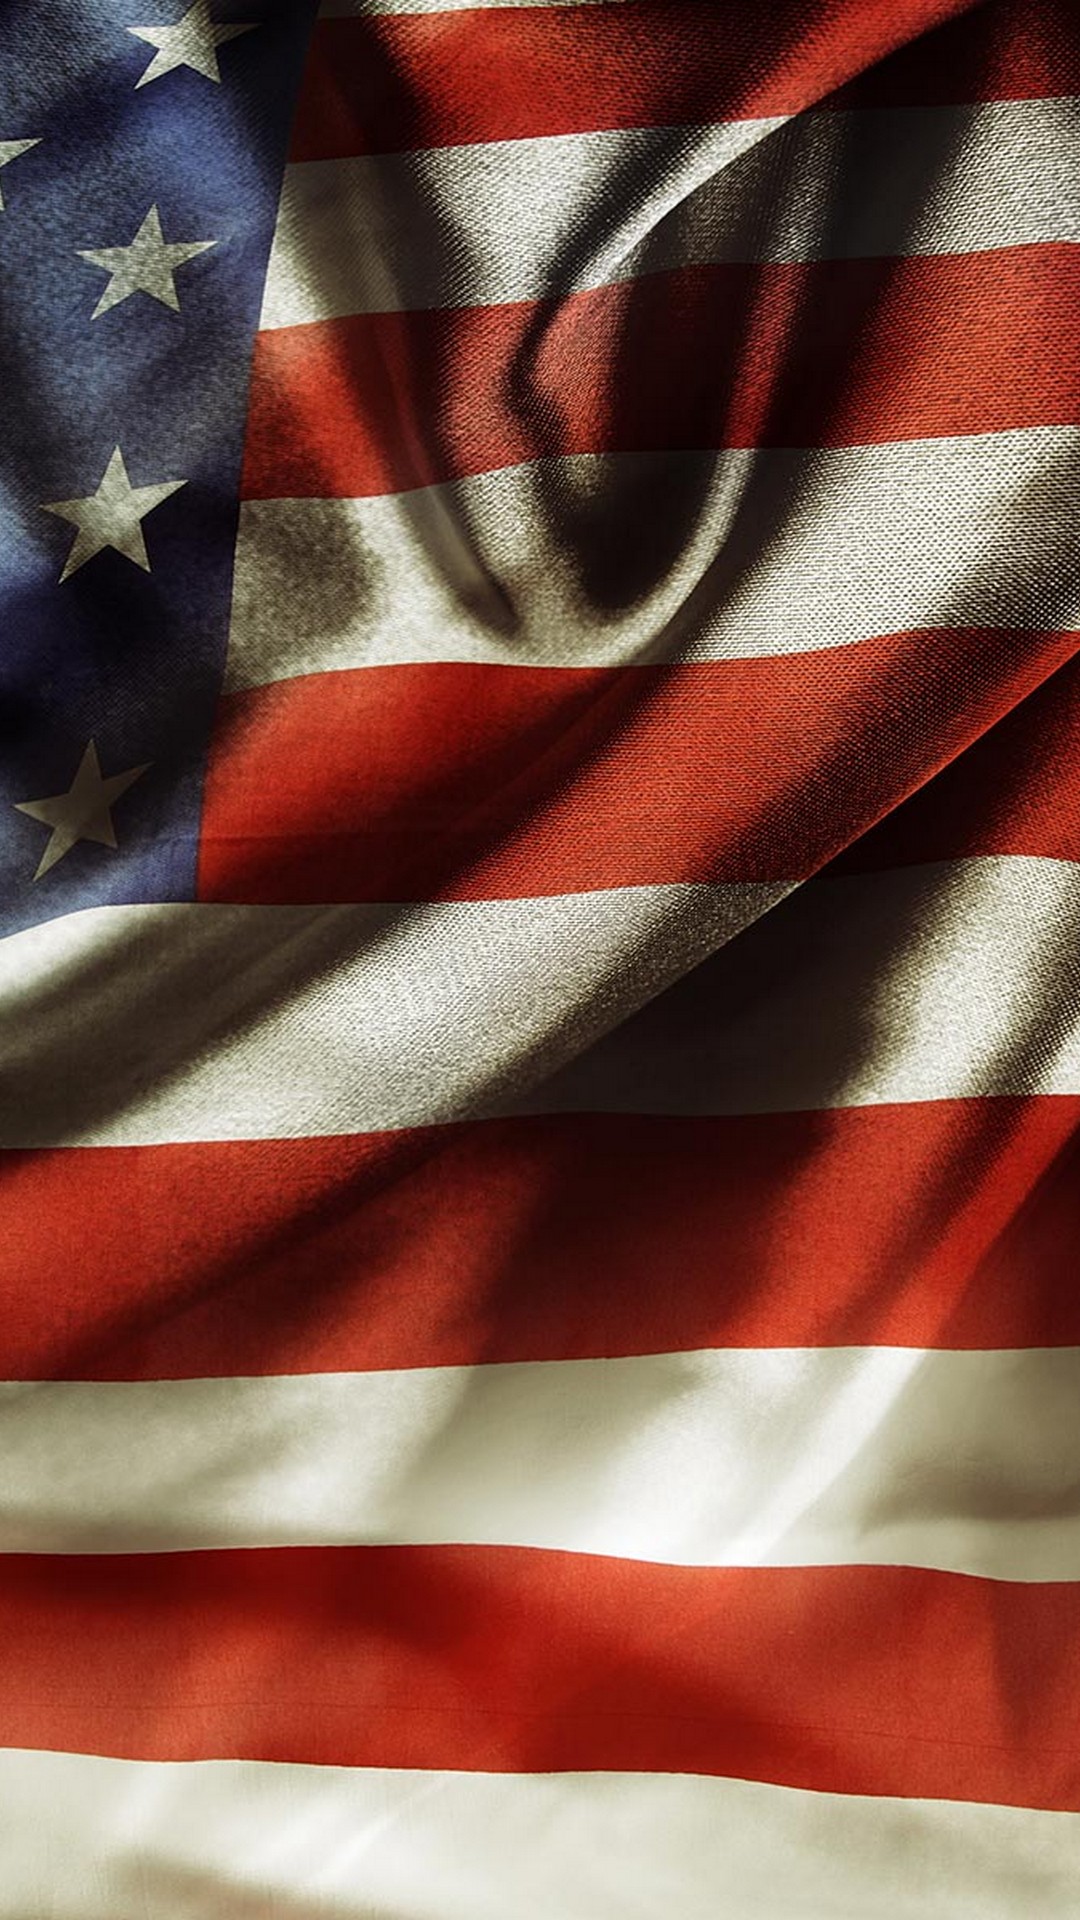 American Flag iPhone 8 Wallpaper with high-resolution 1080x1920 pixel. You can use this wallpaper for your iPhone 5, 6, 7, 8, X, XS, XR backgrounds, Mobile Screensaver, or iPad Lock Screen